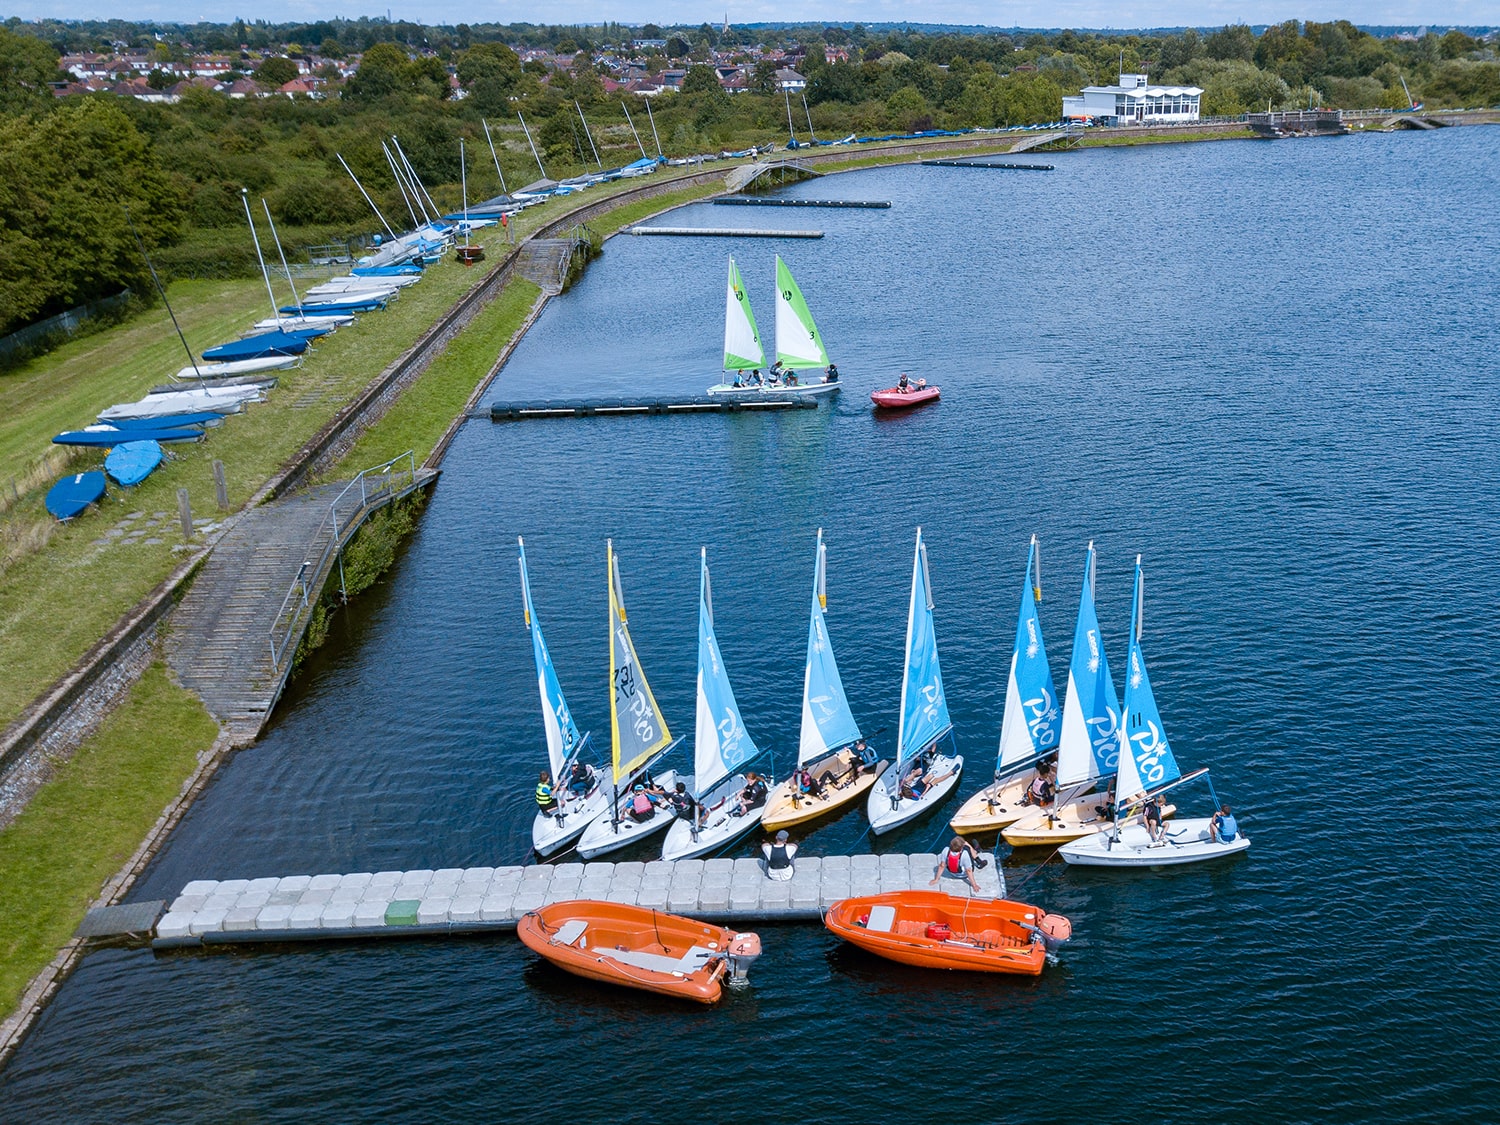 sailing boats on pontoon from drone